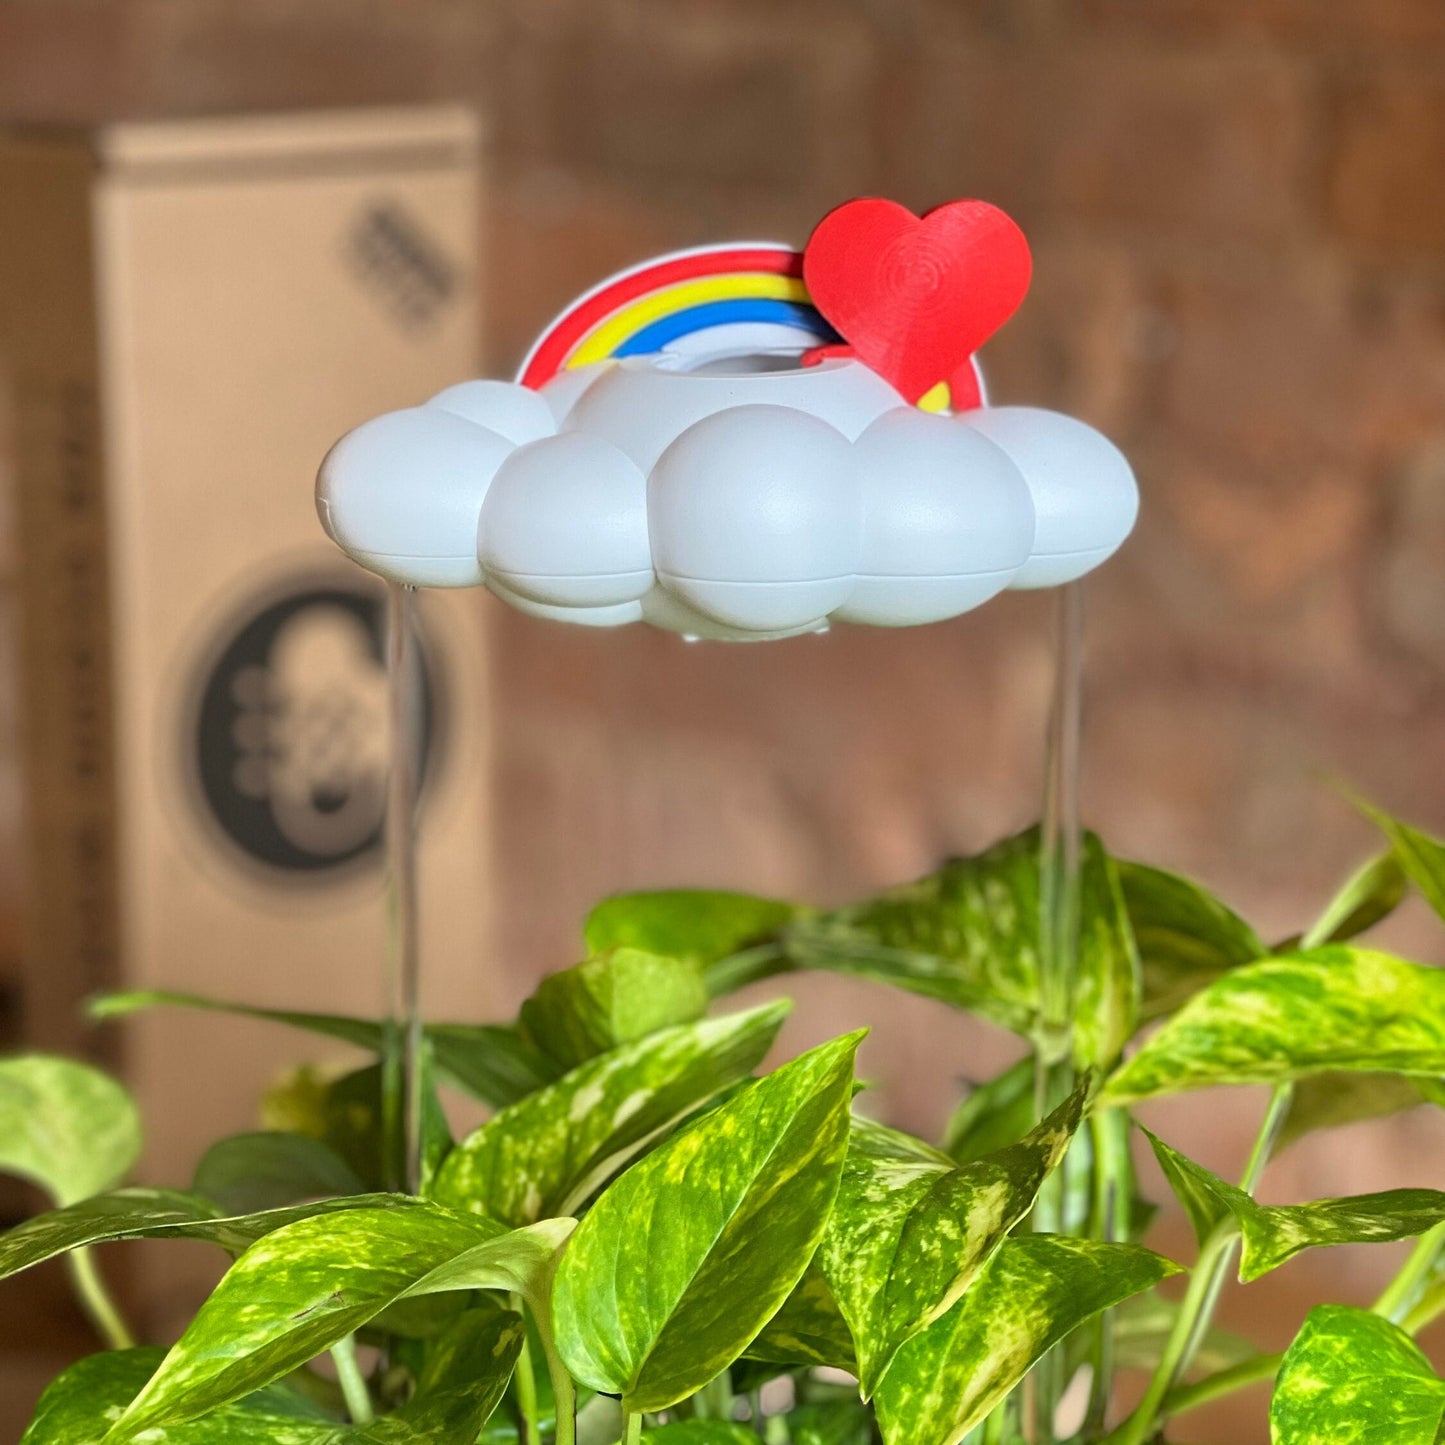 Original Dripping Rain Cloud with Red Heart and rainbow charms